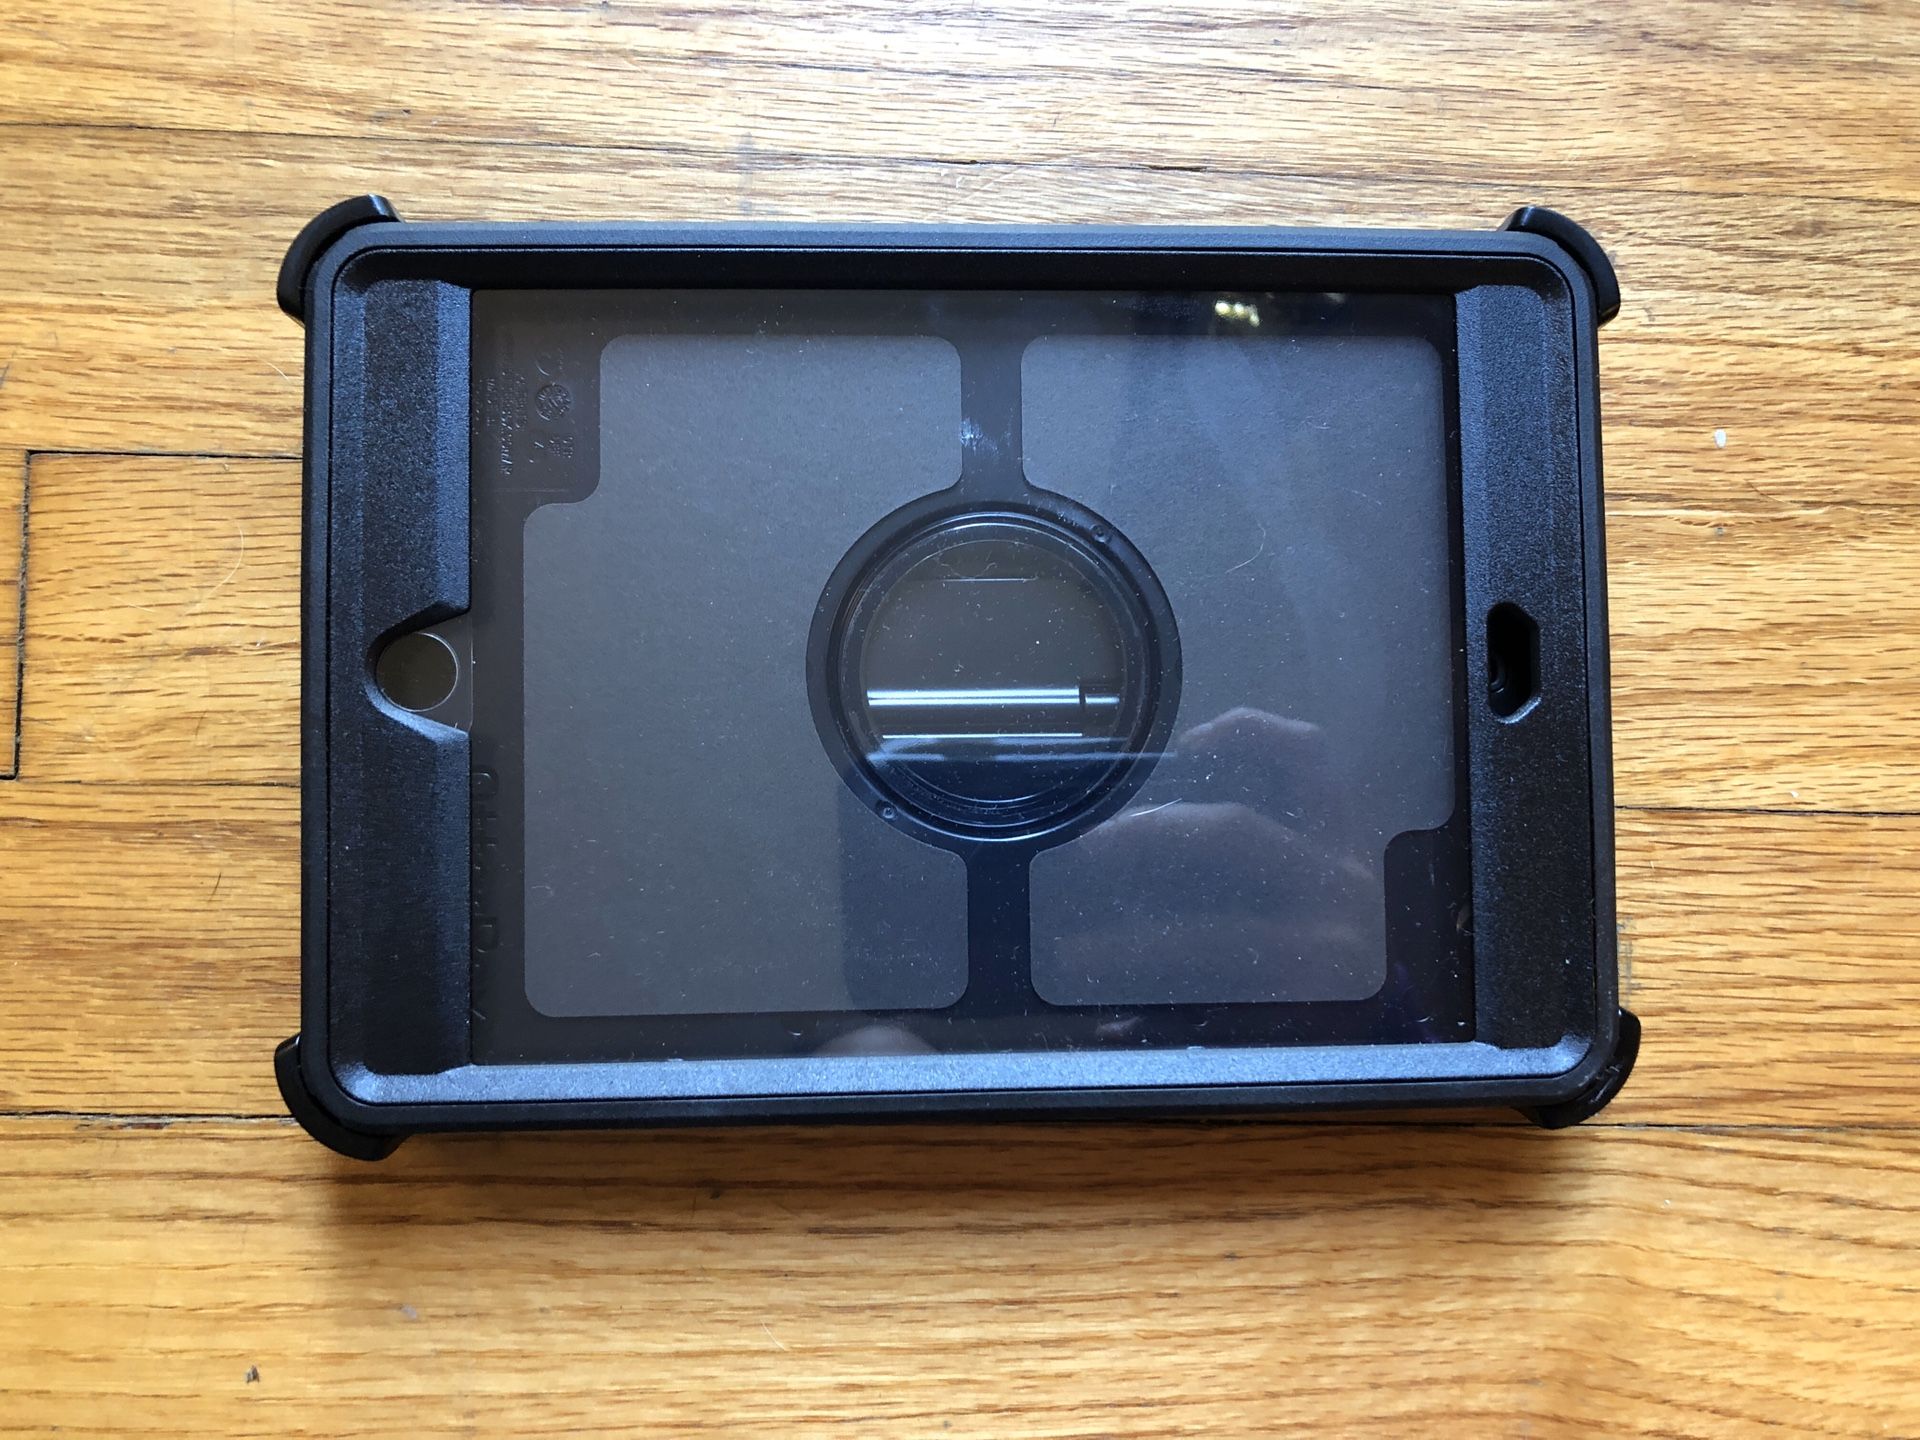 Otter box iPad mini case for generation 1, 2 and 3